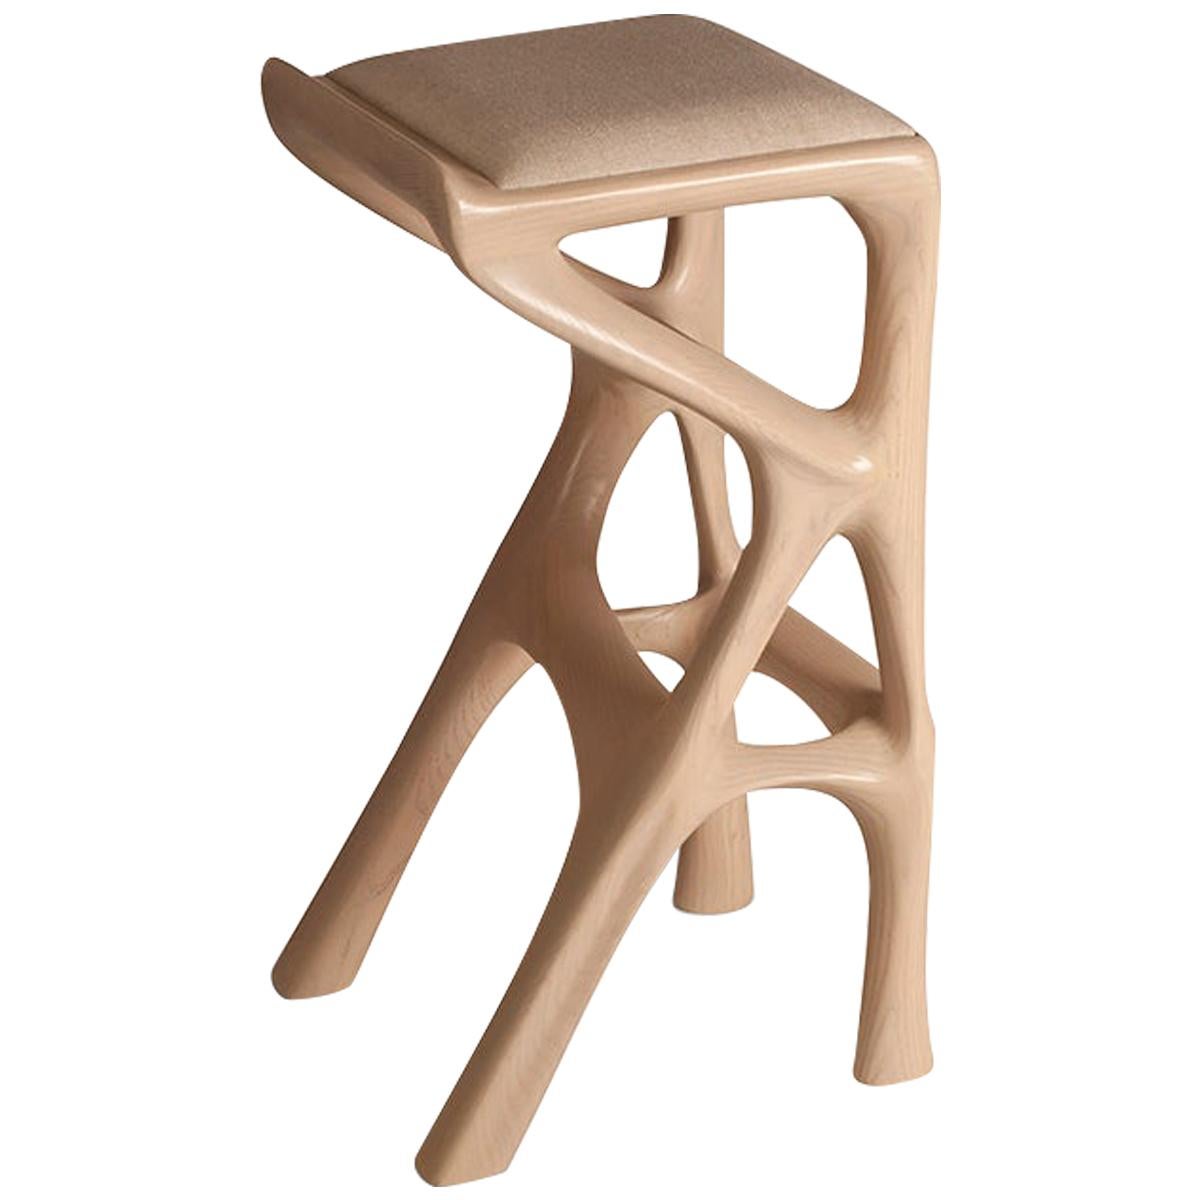 Amorph Chimera Bar Stool Asian Sand stain on Ash wood with Upholstery For Sale